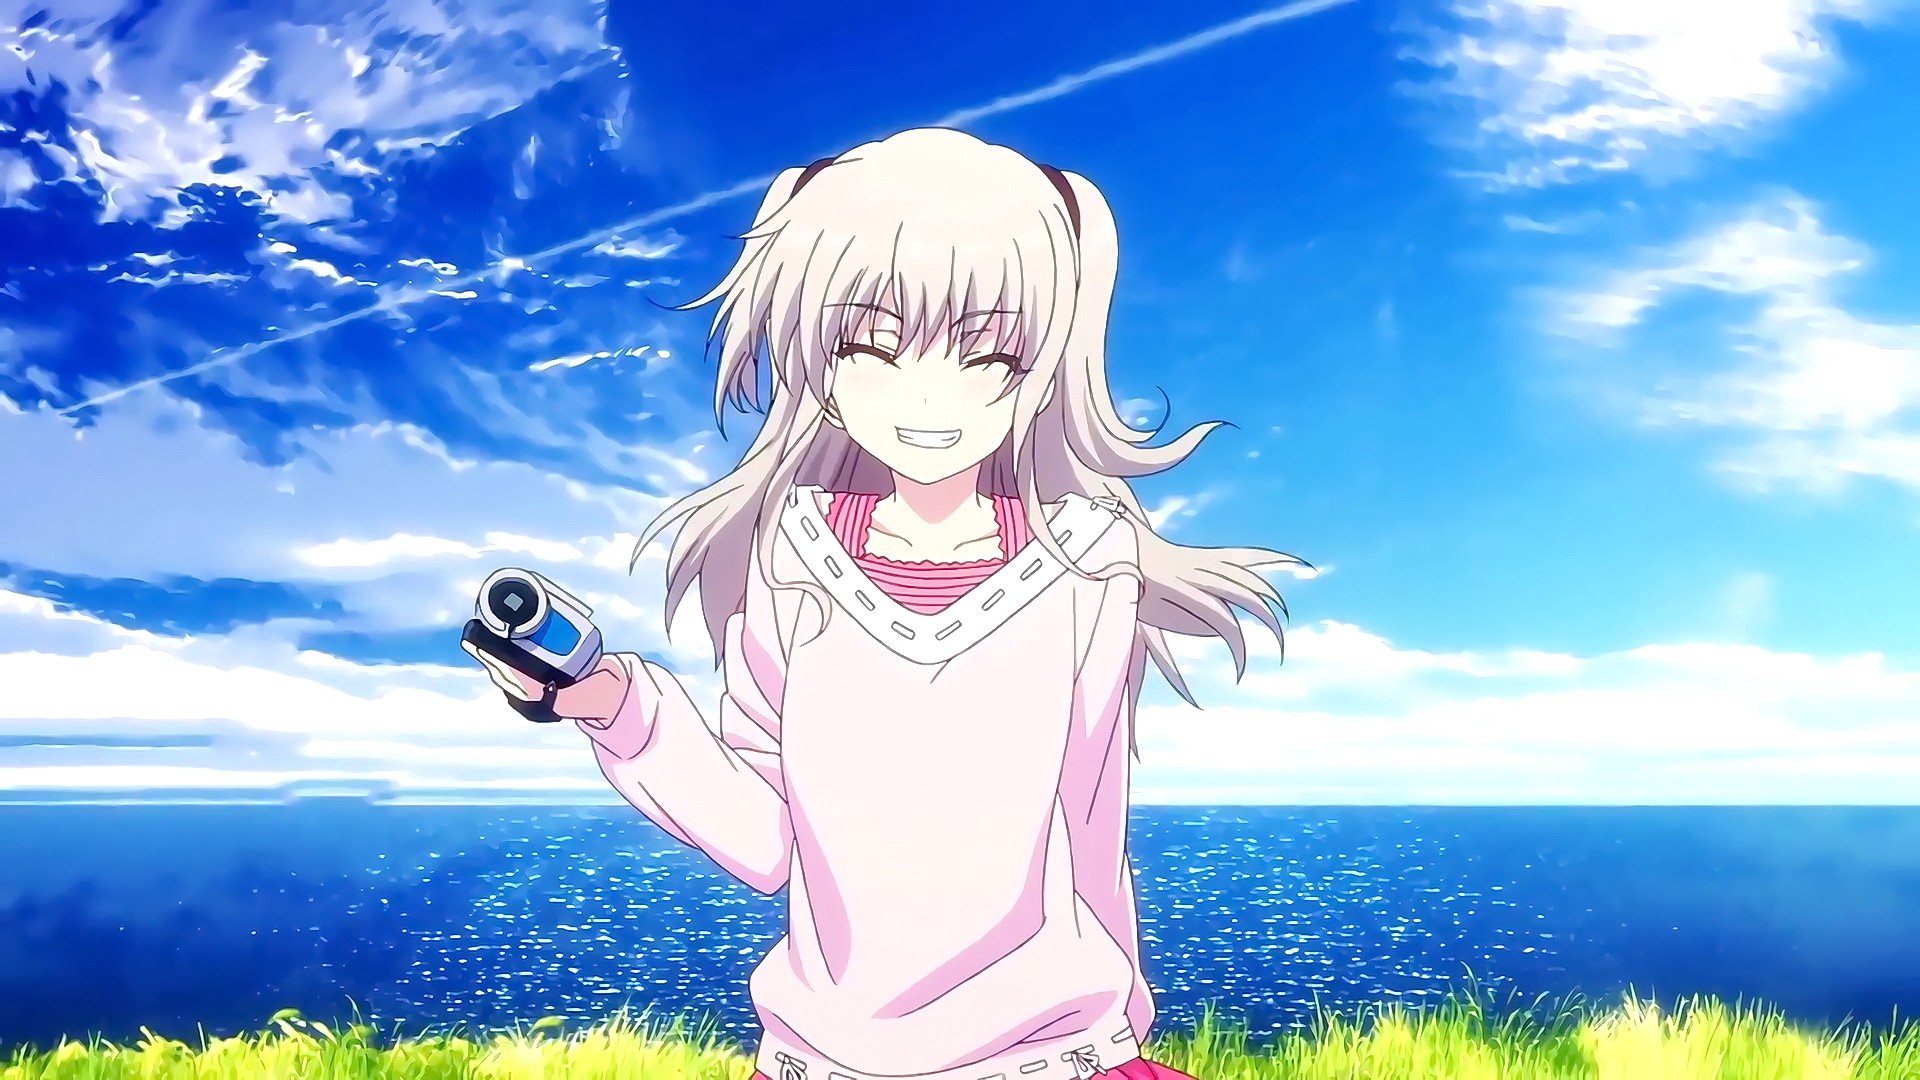 Anime Anime Girls Charlotte Anime Tomori Nao Sea Closed Eyes Silver Hair Sky Clouds Smiling Water Bl 1920x1080